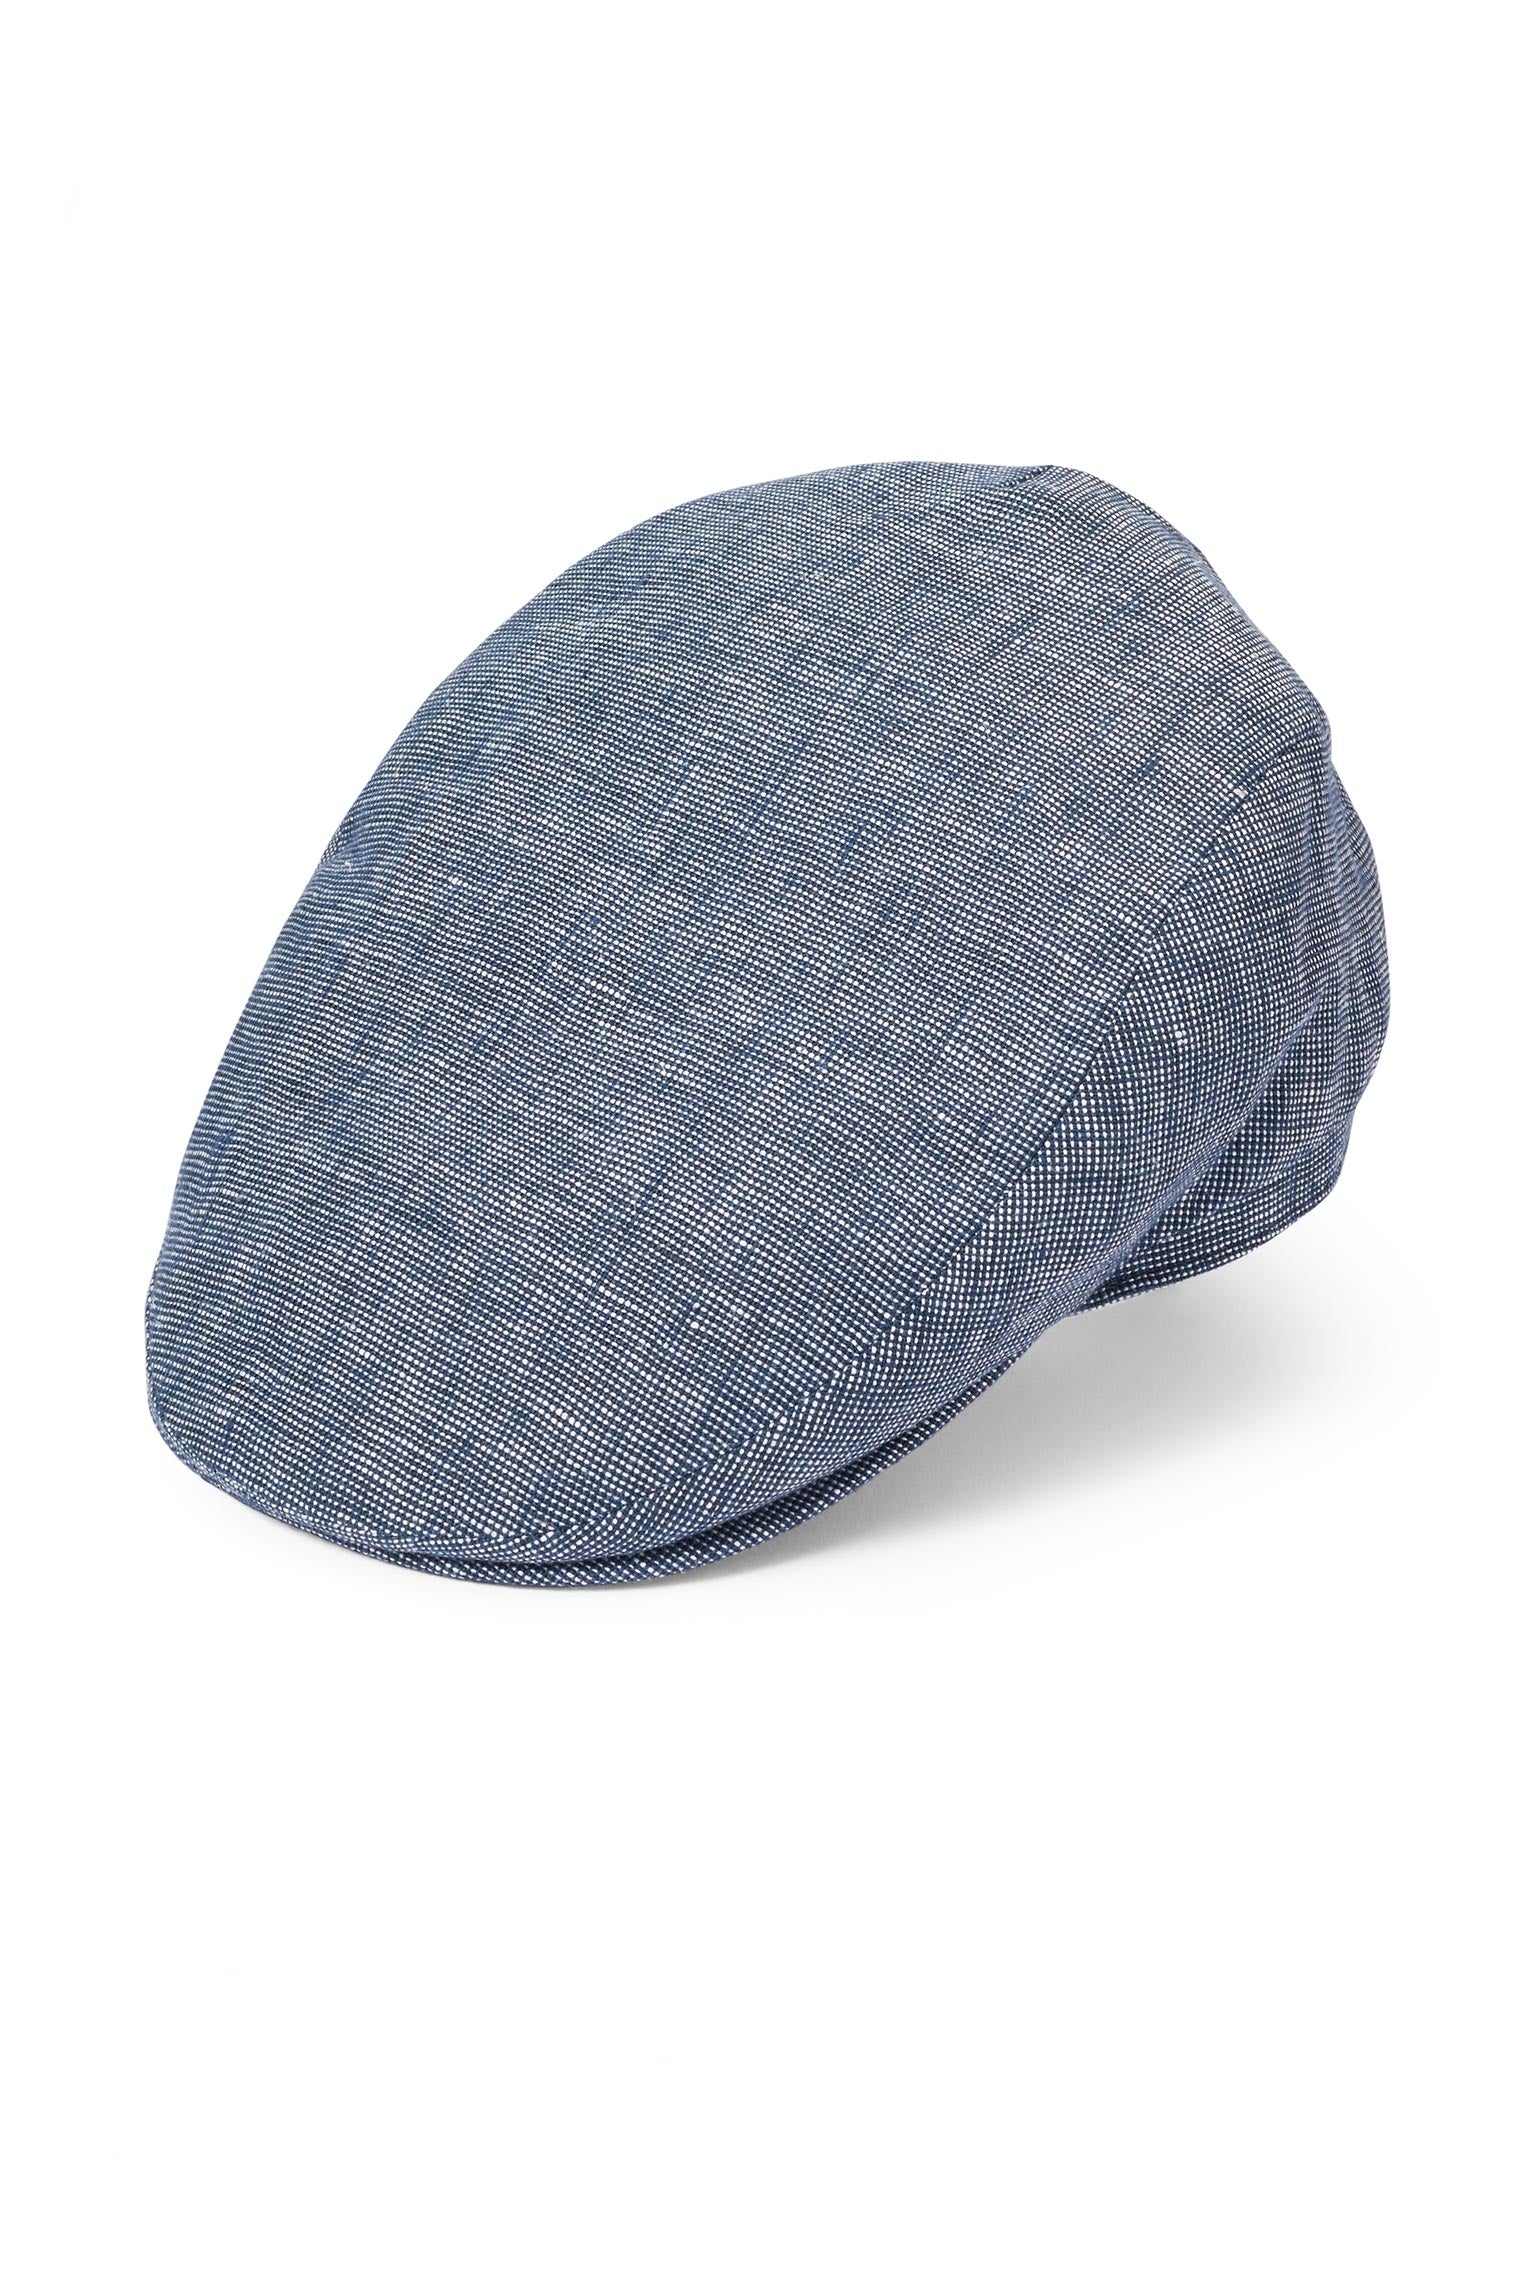 Summer Grosvenor Blue Flat Cap - Father's Day Gift Guide - Lock & Co. Hatters London UK